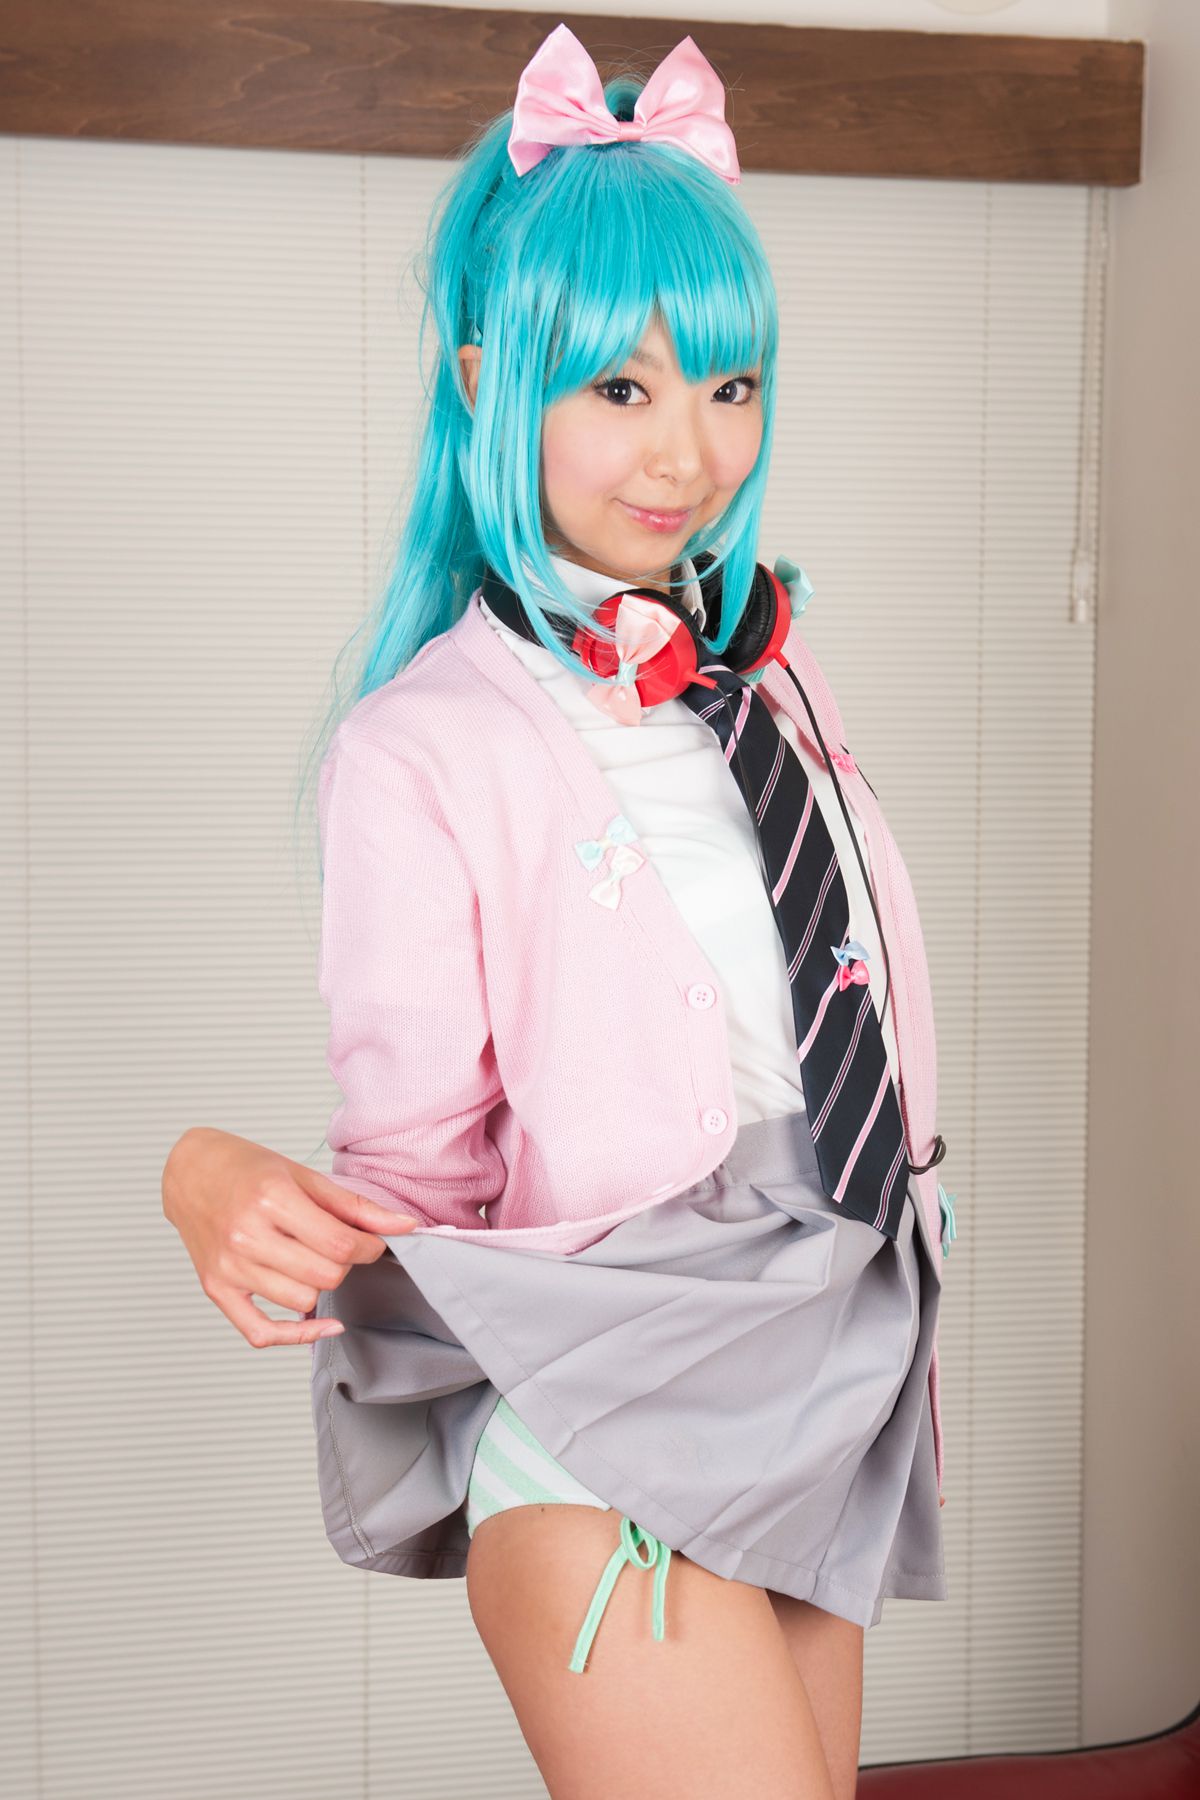 taotuhome[Cosplay] Necoco as Hatsune Miku from Vocaloid 套图第114张